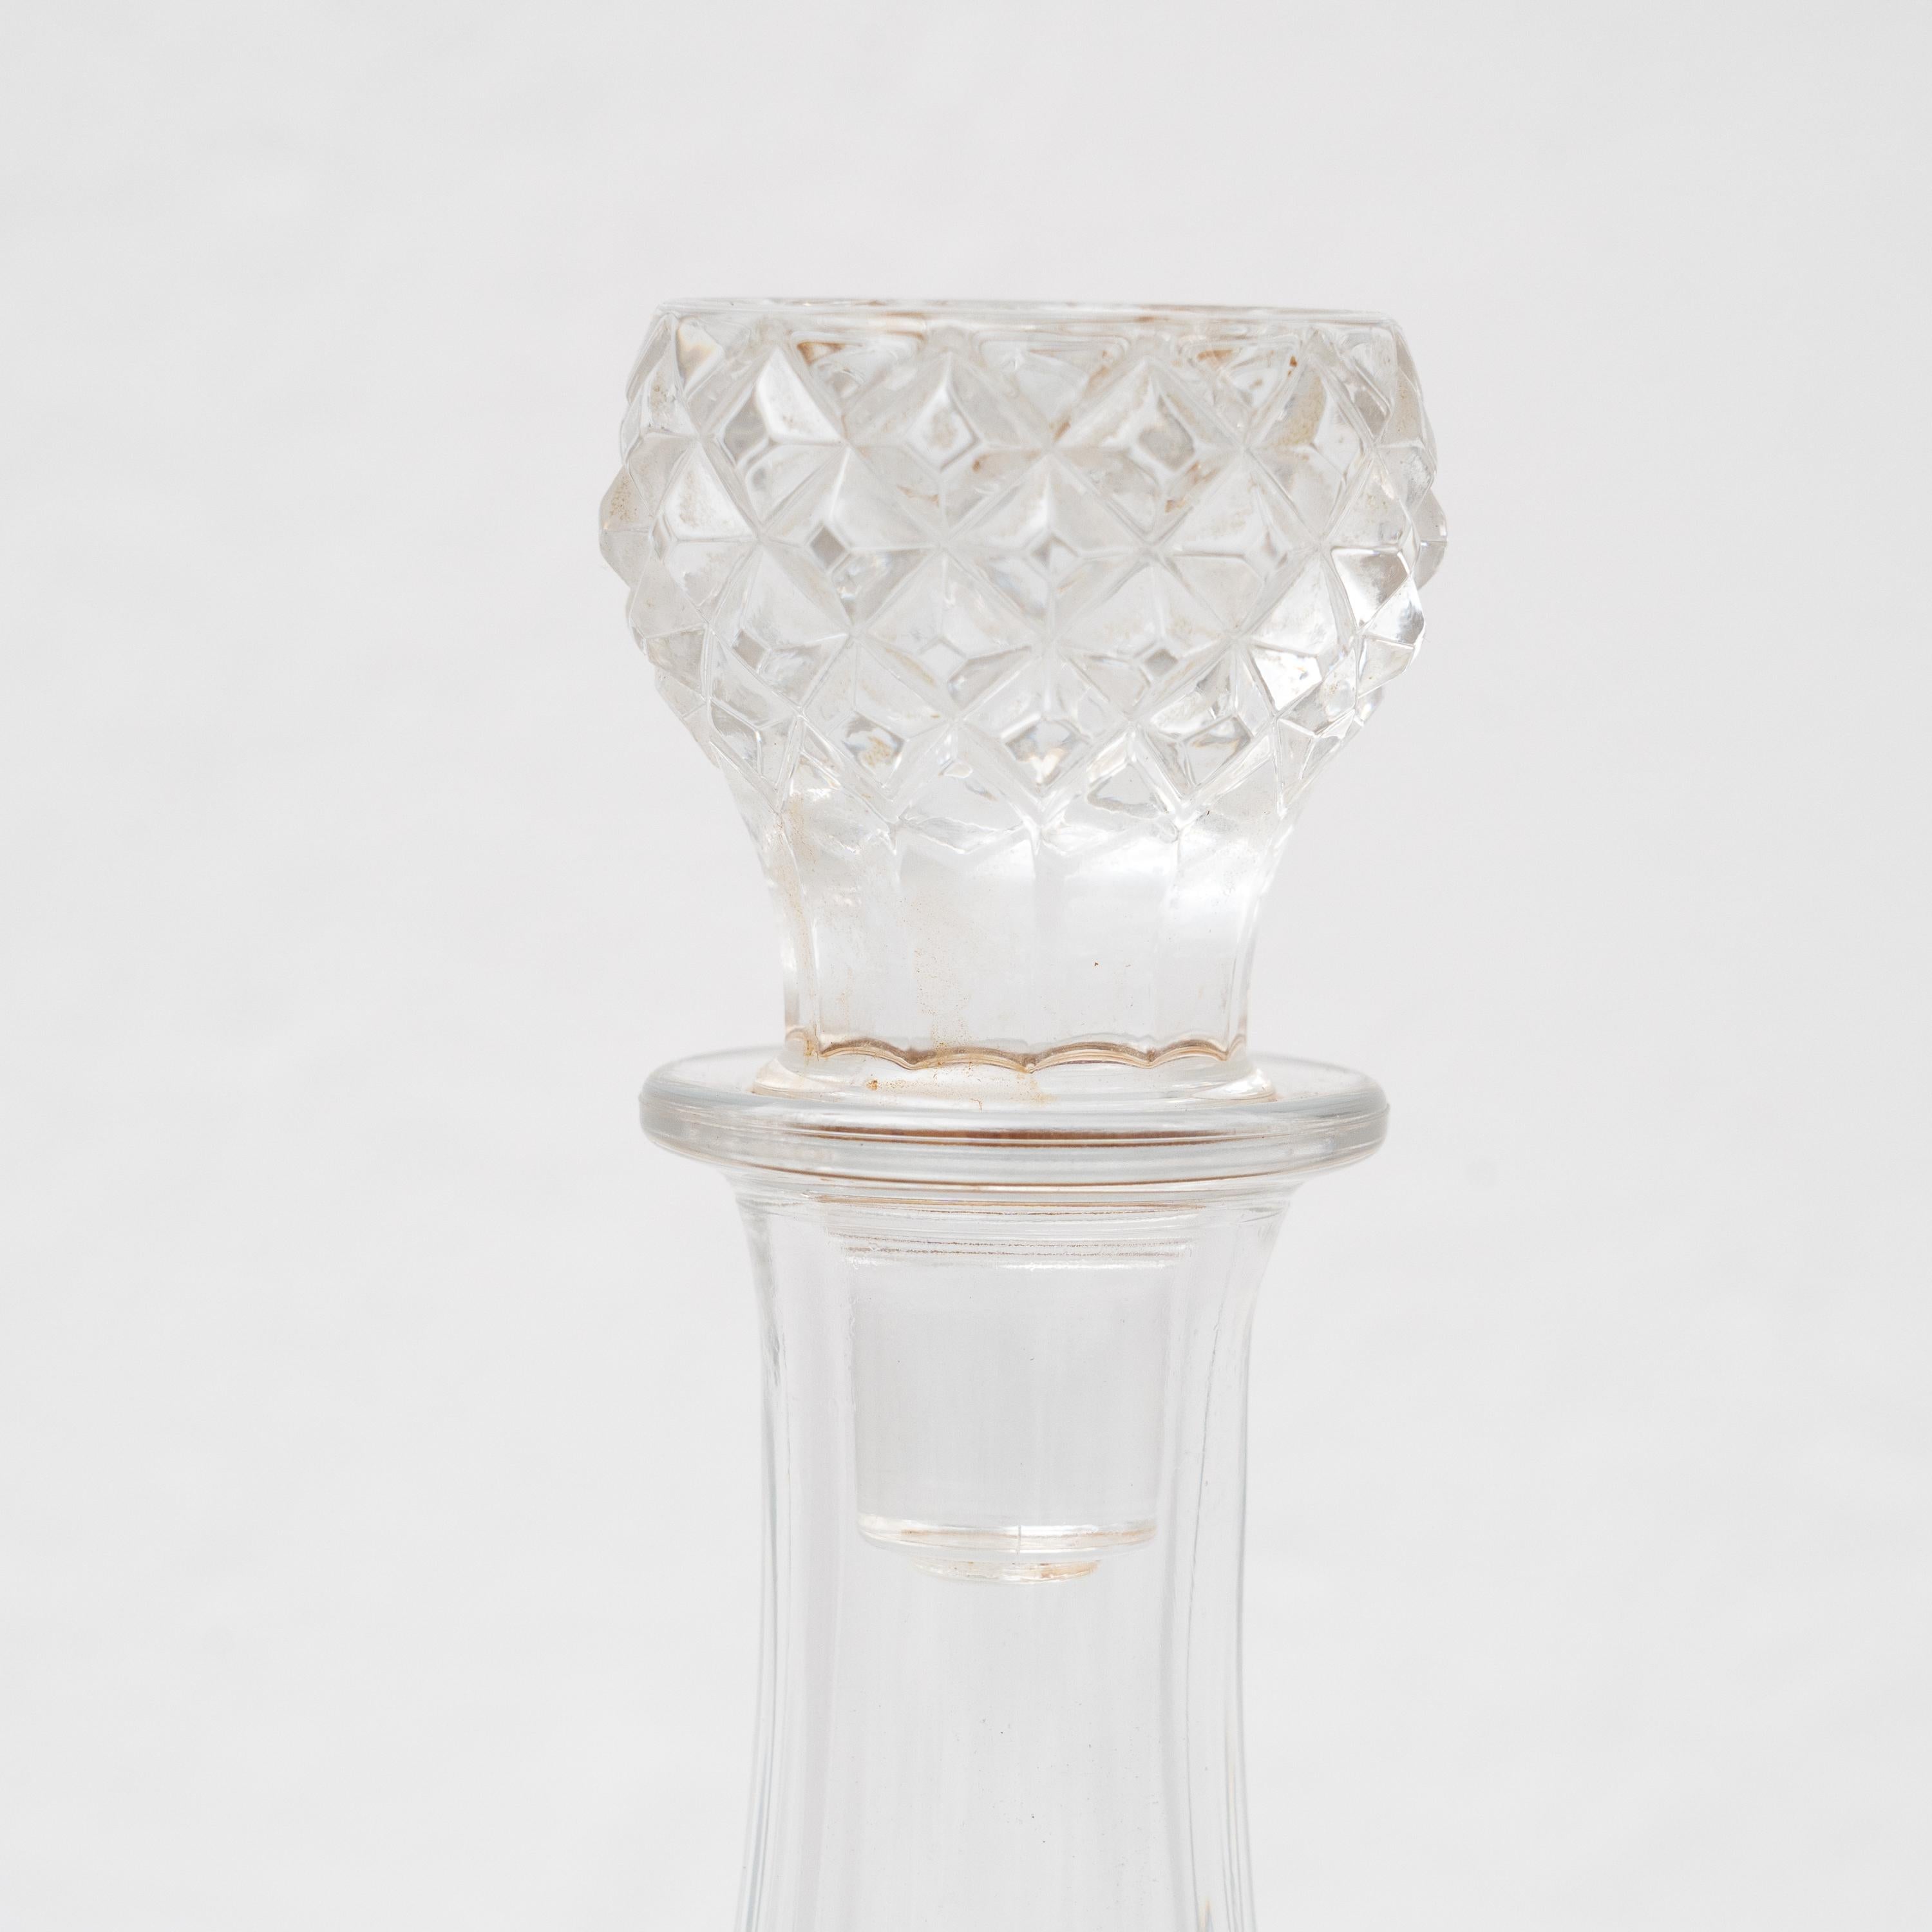  Vintage Glass Vase with Diamond Capped Style, Circa 1930  For Sale 2